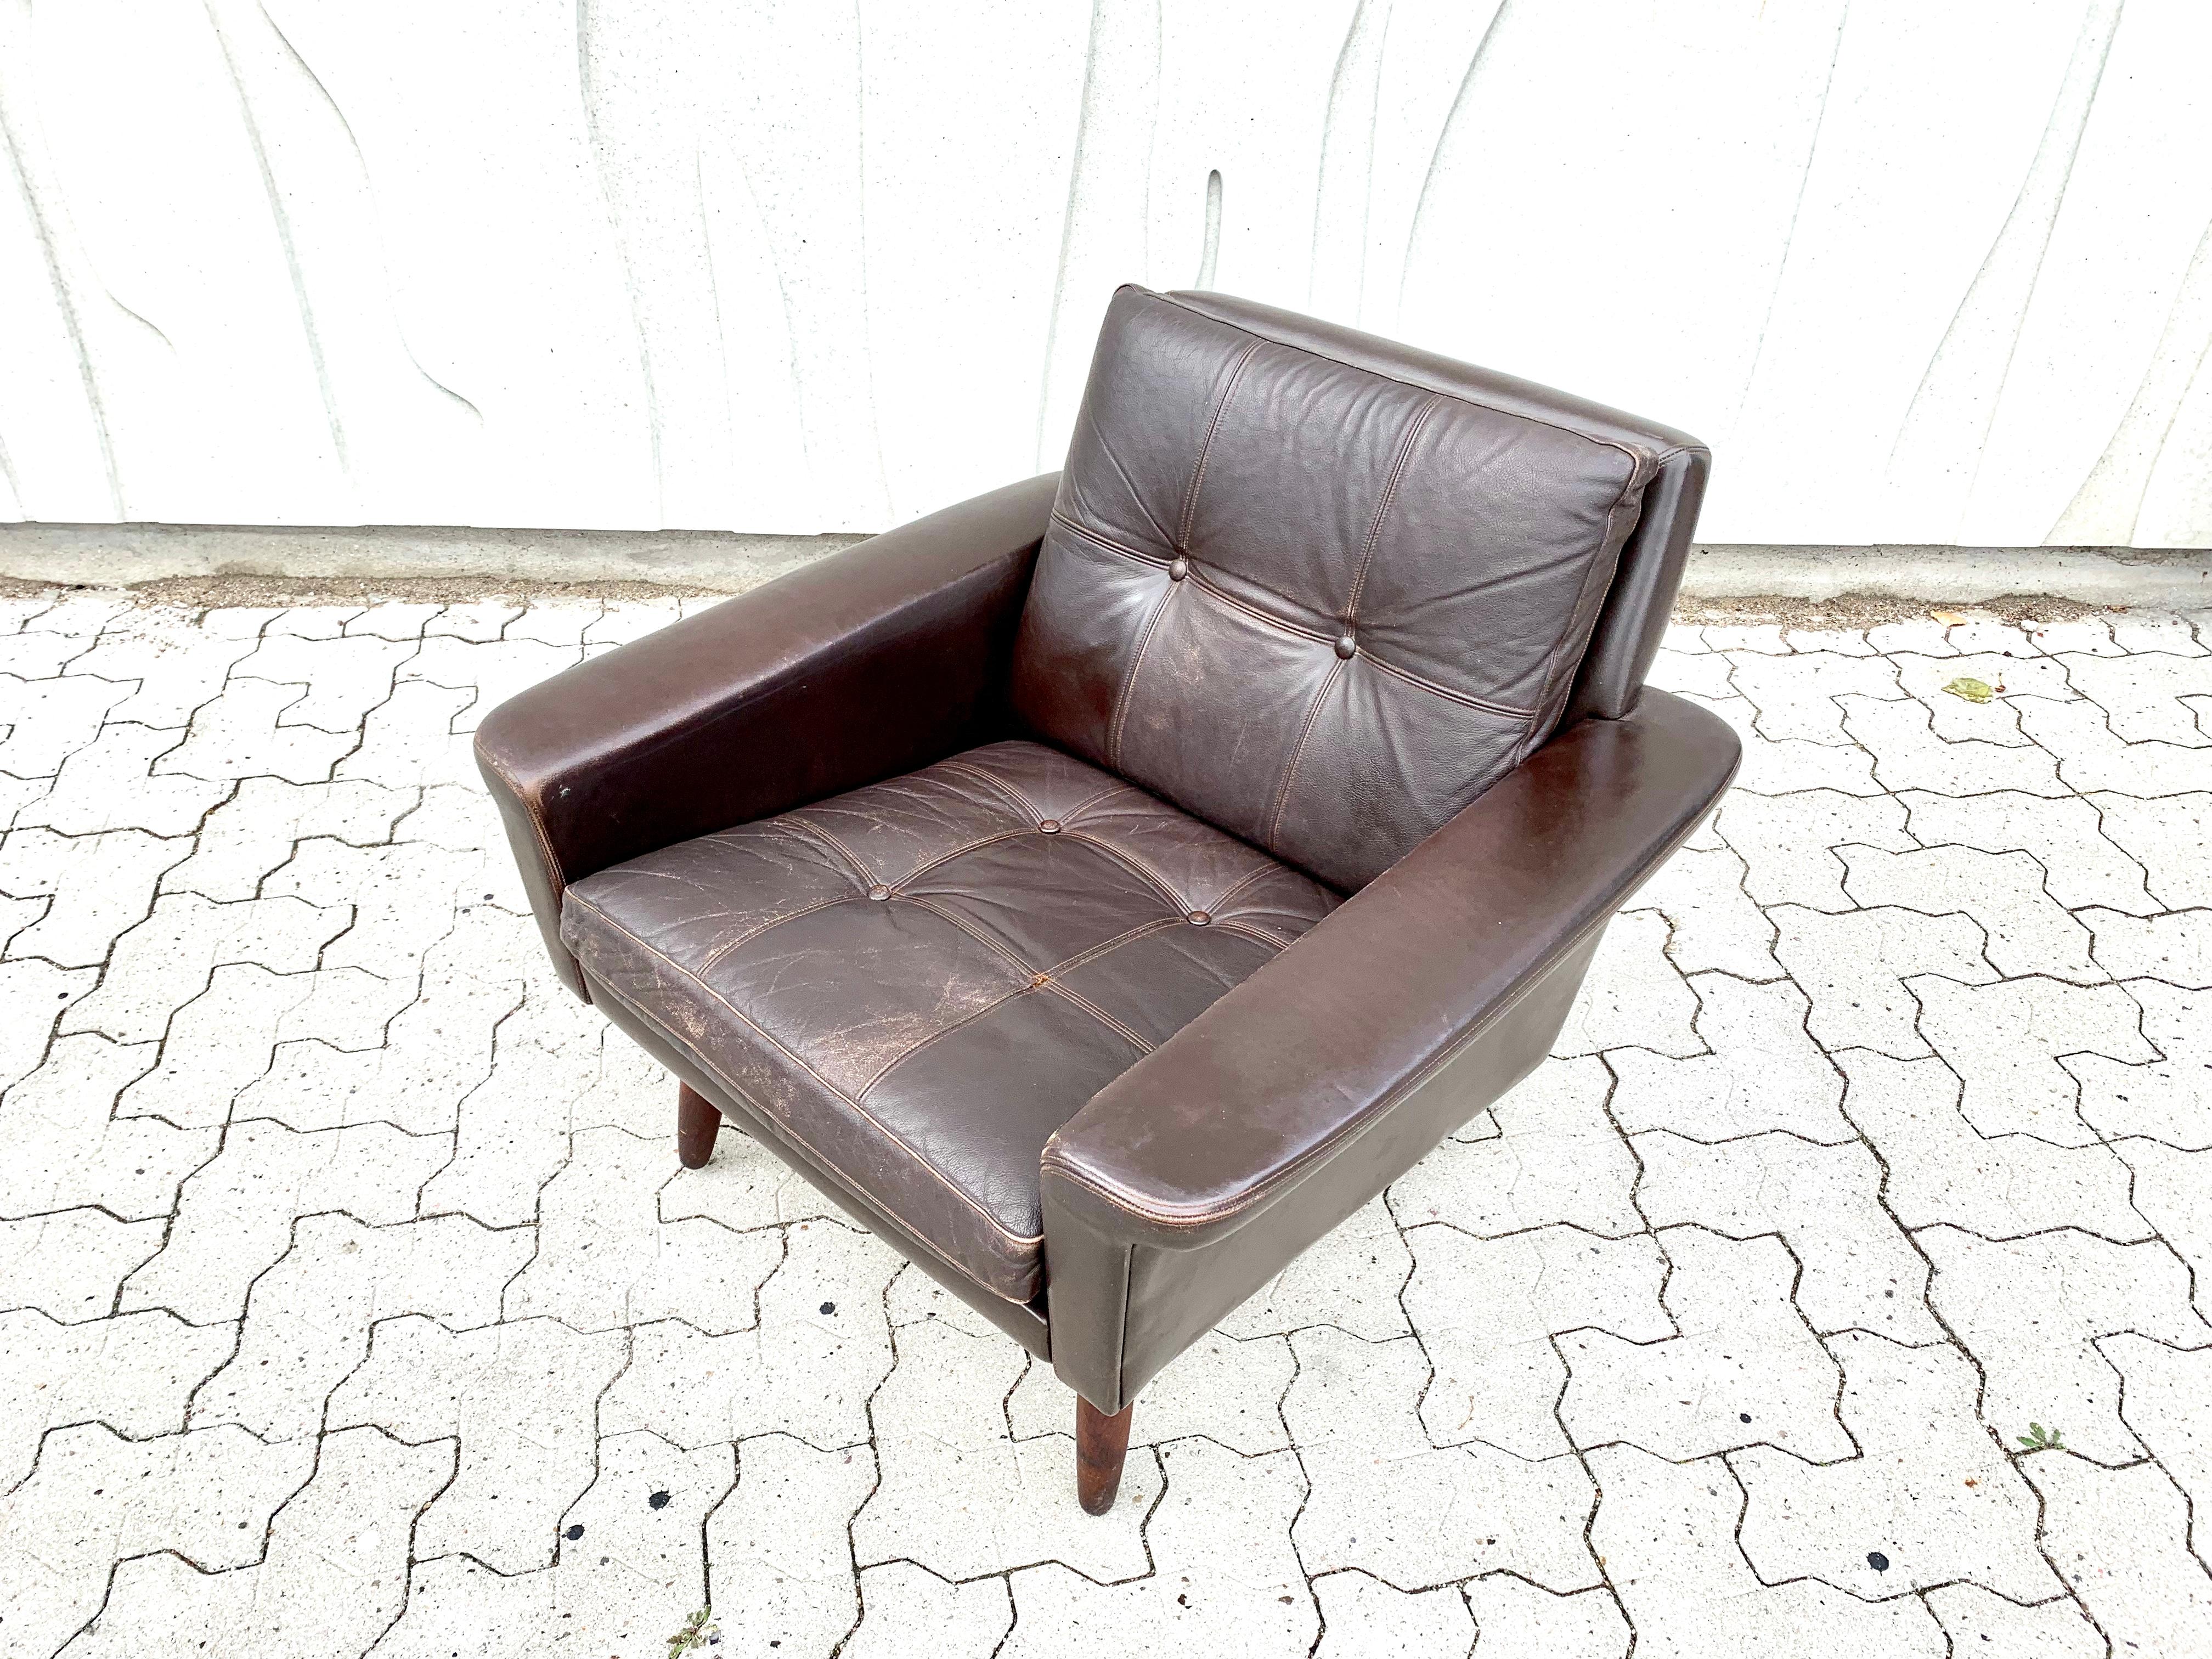 Svend skipper lounge chair by Skippers Furniture, Denmark, 1960s, tapered legs and chocolate brown leather.